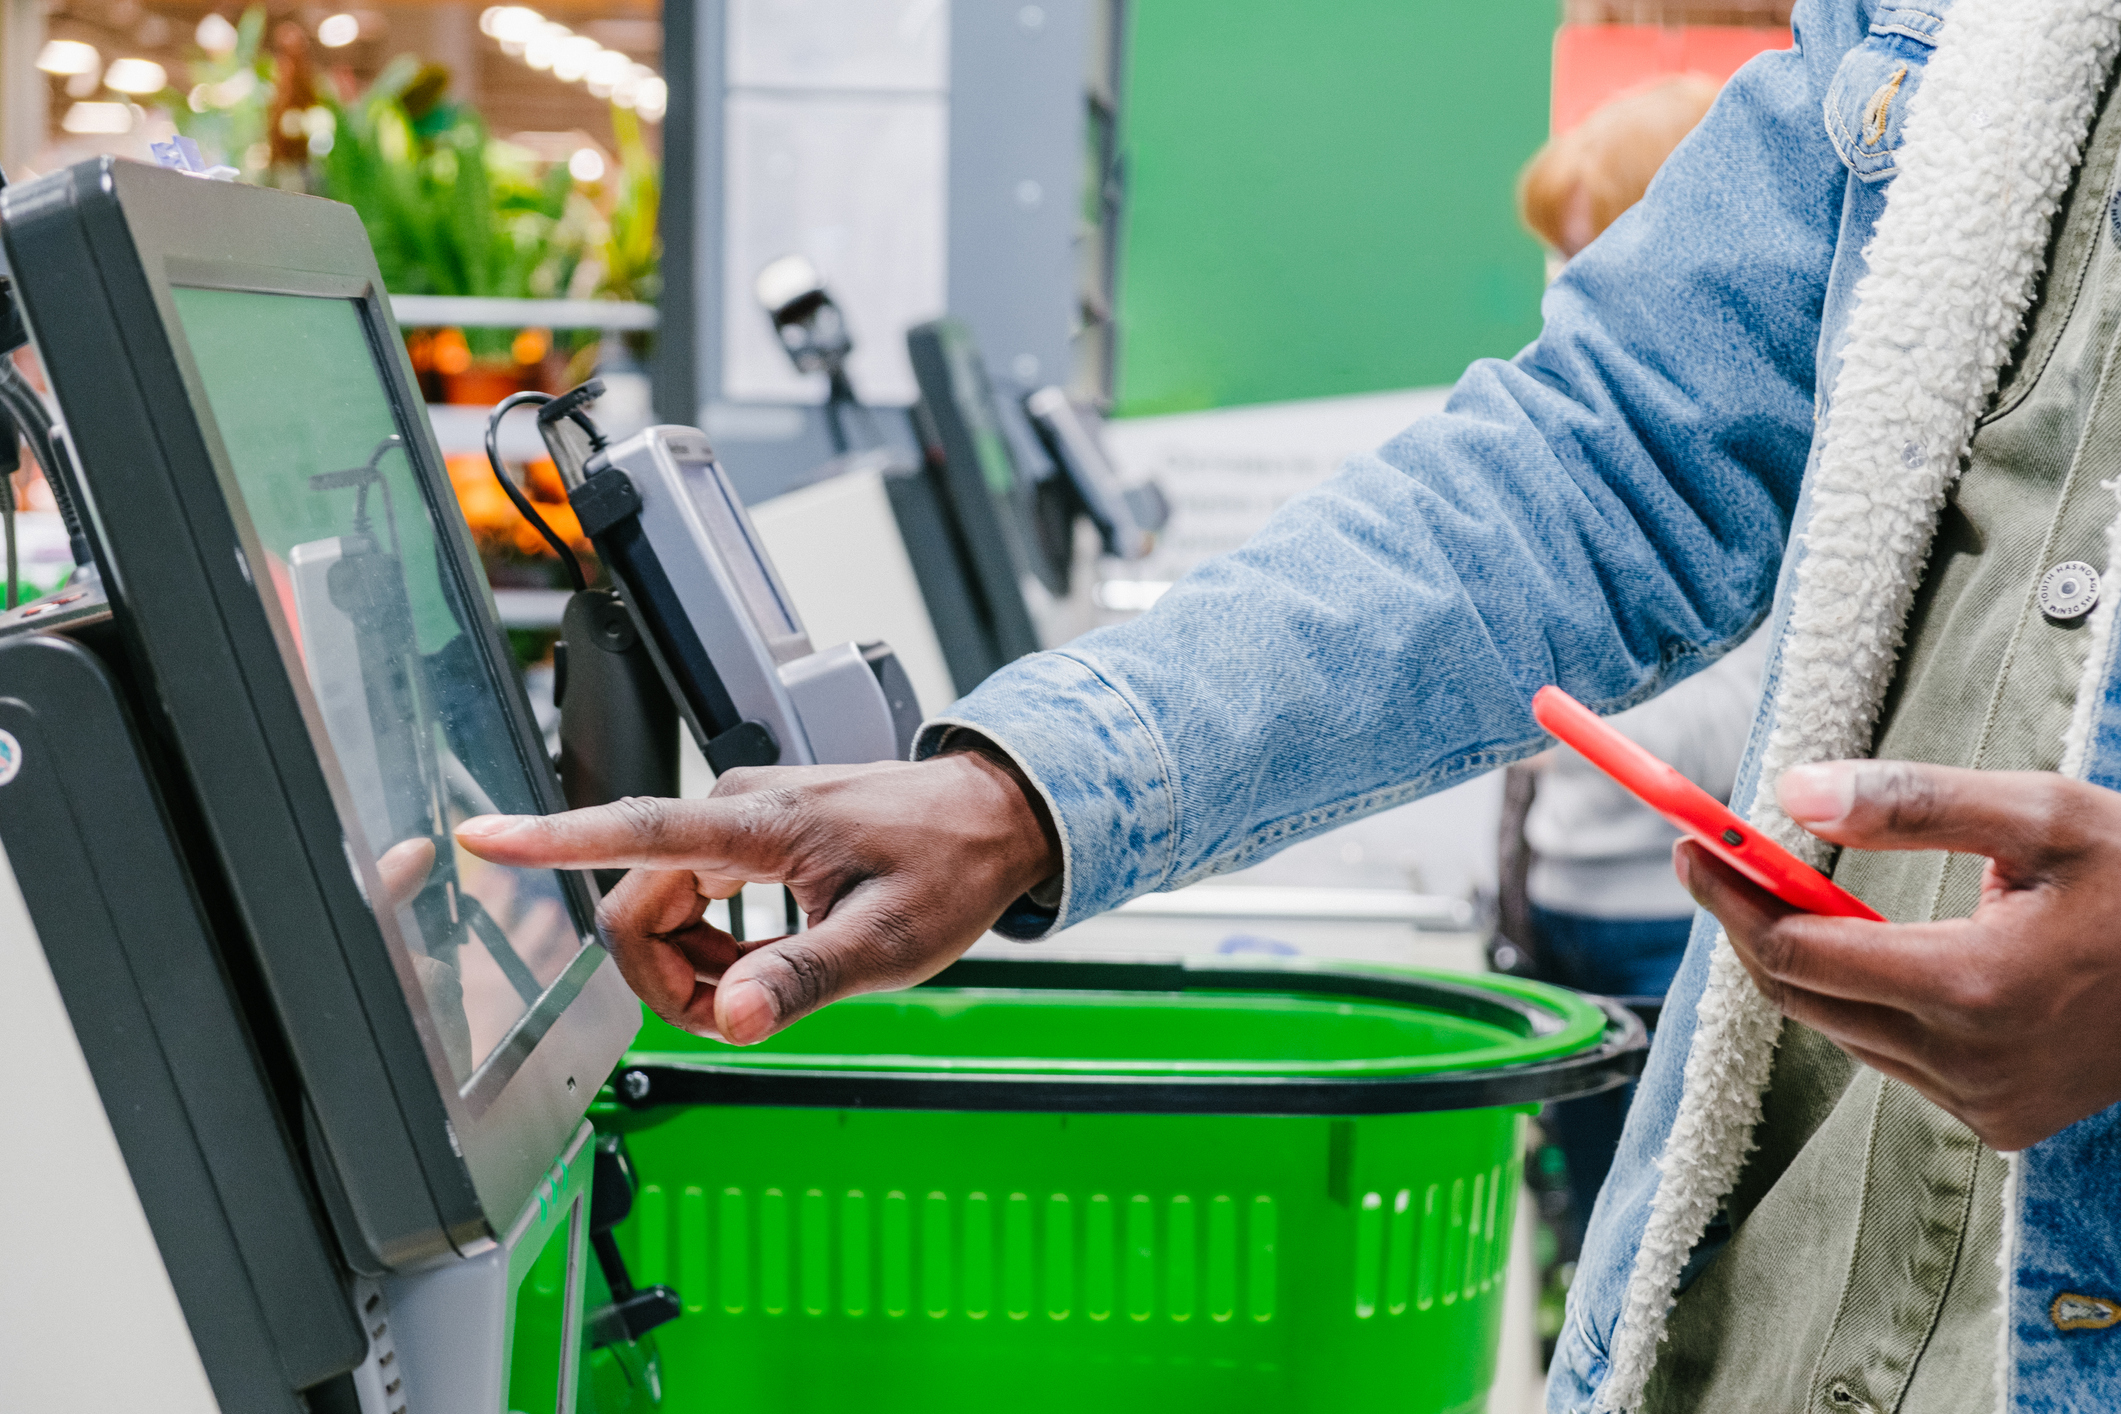 Ranked: the best supermarket loyalty scheme, from Tesco to Lidl